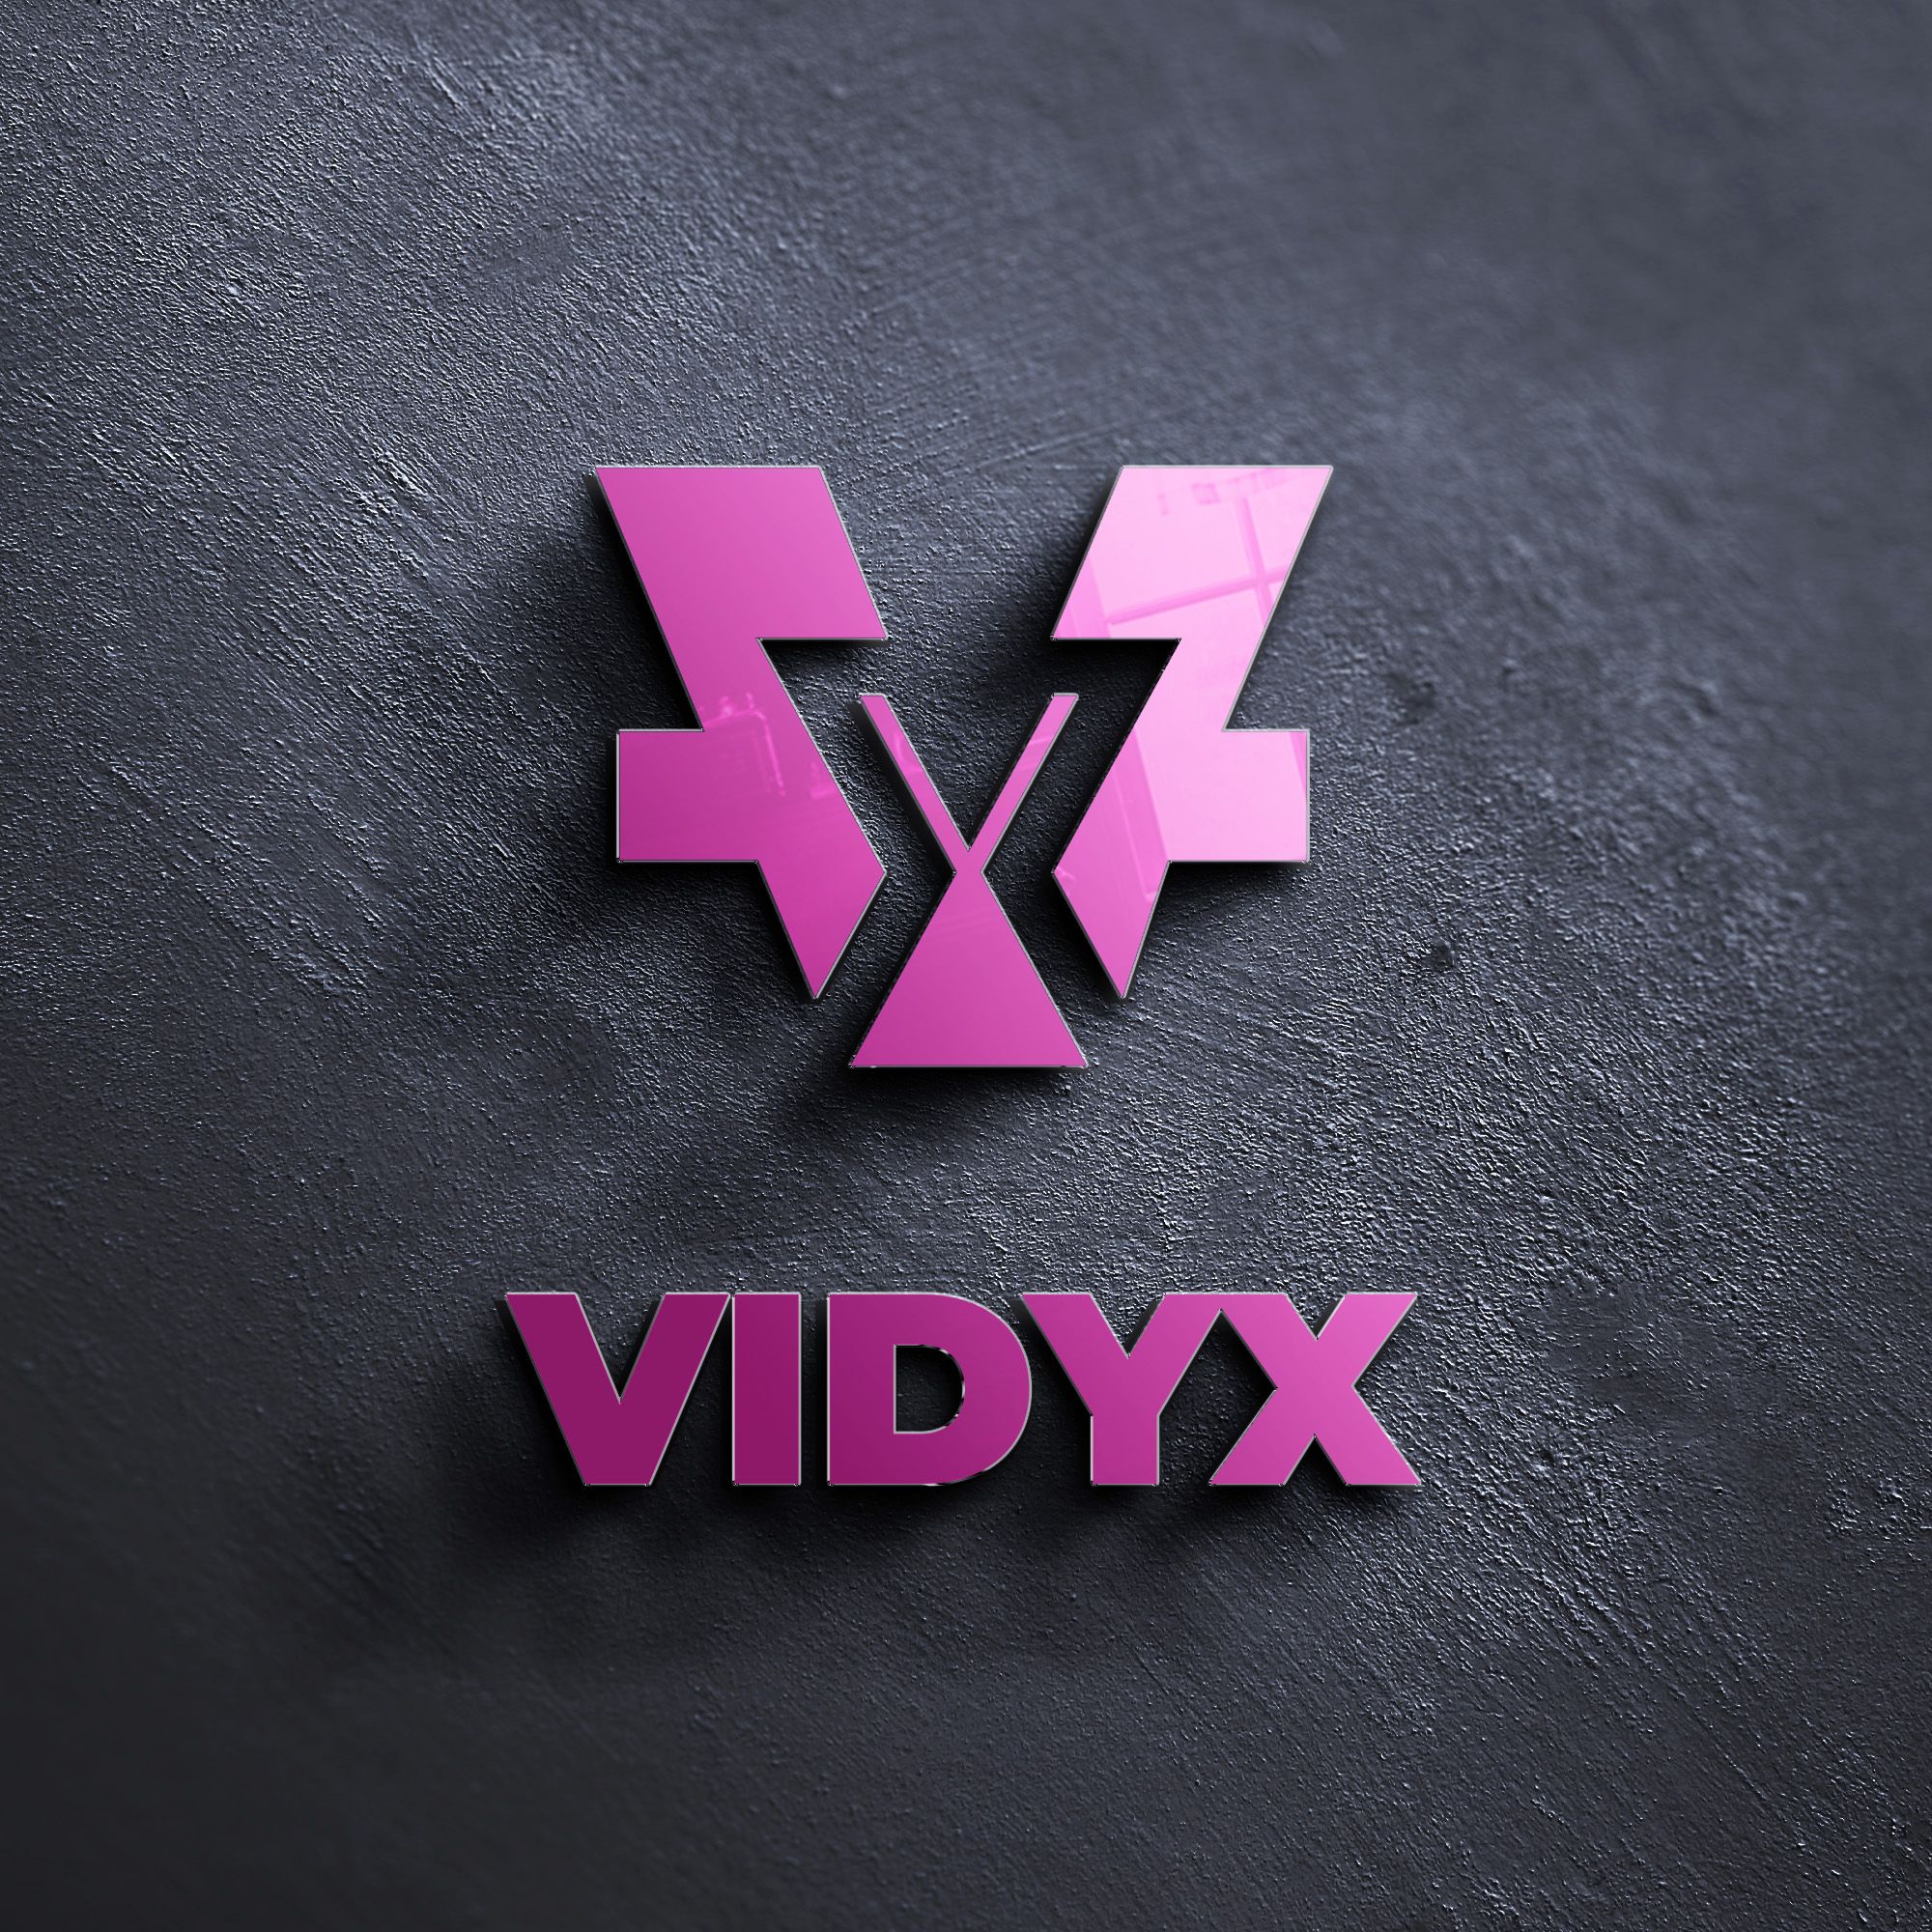 VIDYX - Top cryptocurrency for long-term investors (hodlers)